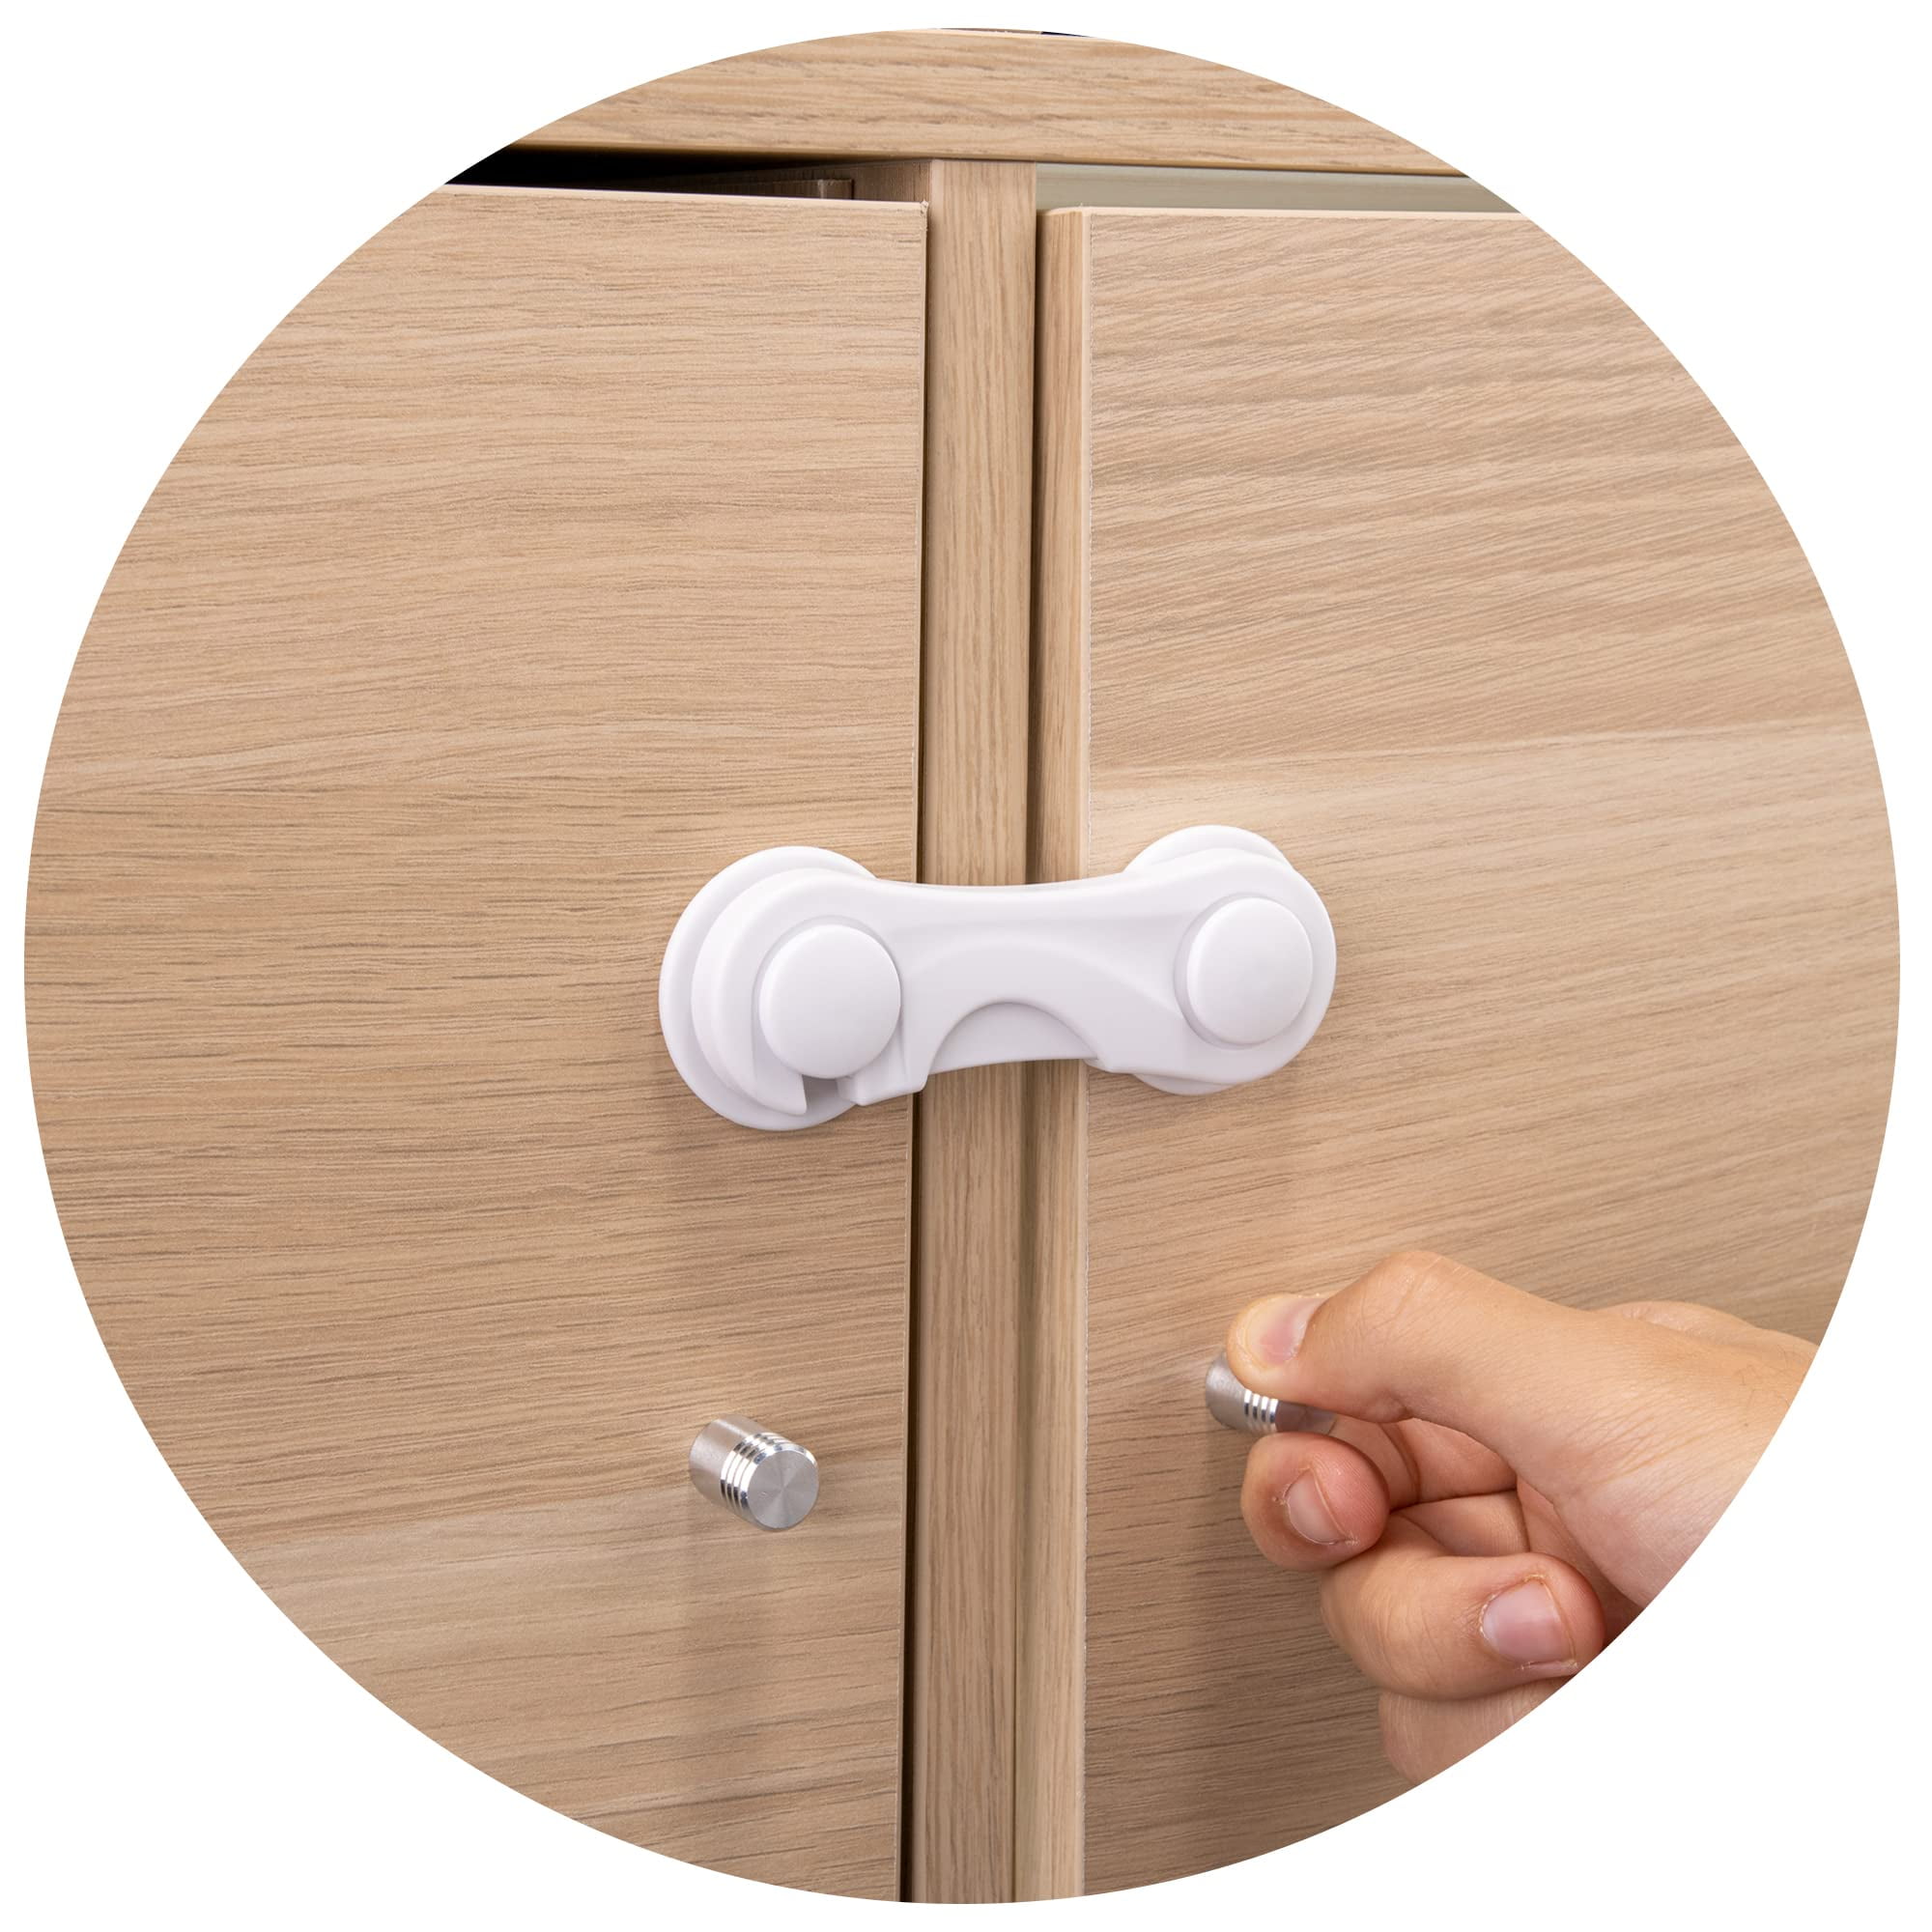 Drawers Child Safety Baby Proofing Locks for Cabinets Toilet Seat Fridge 